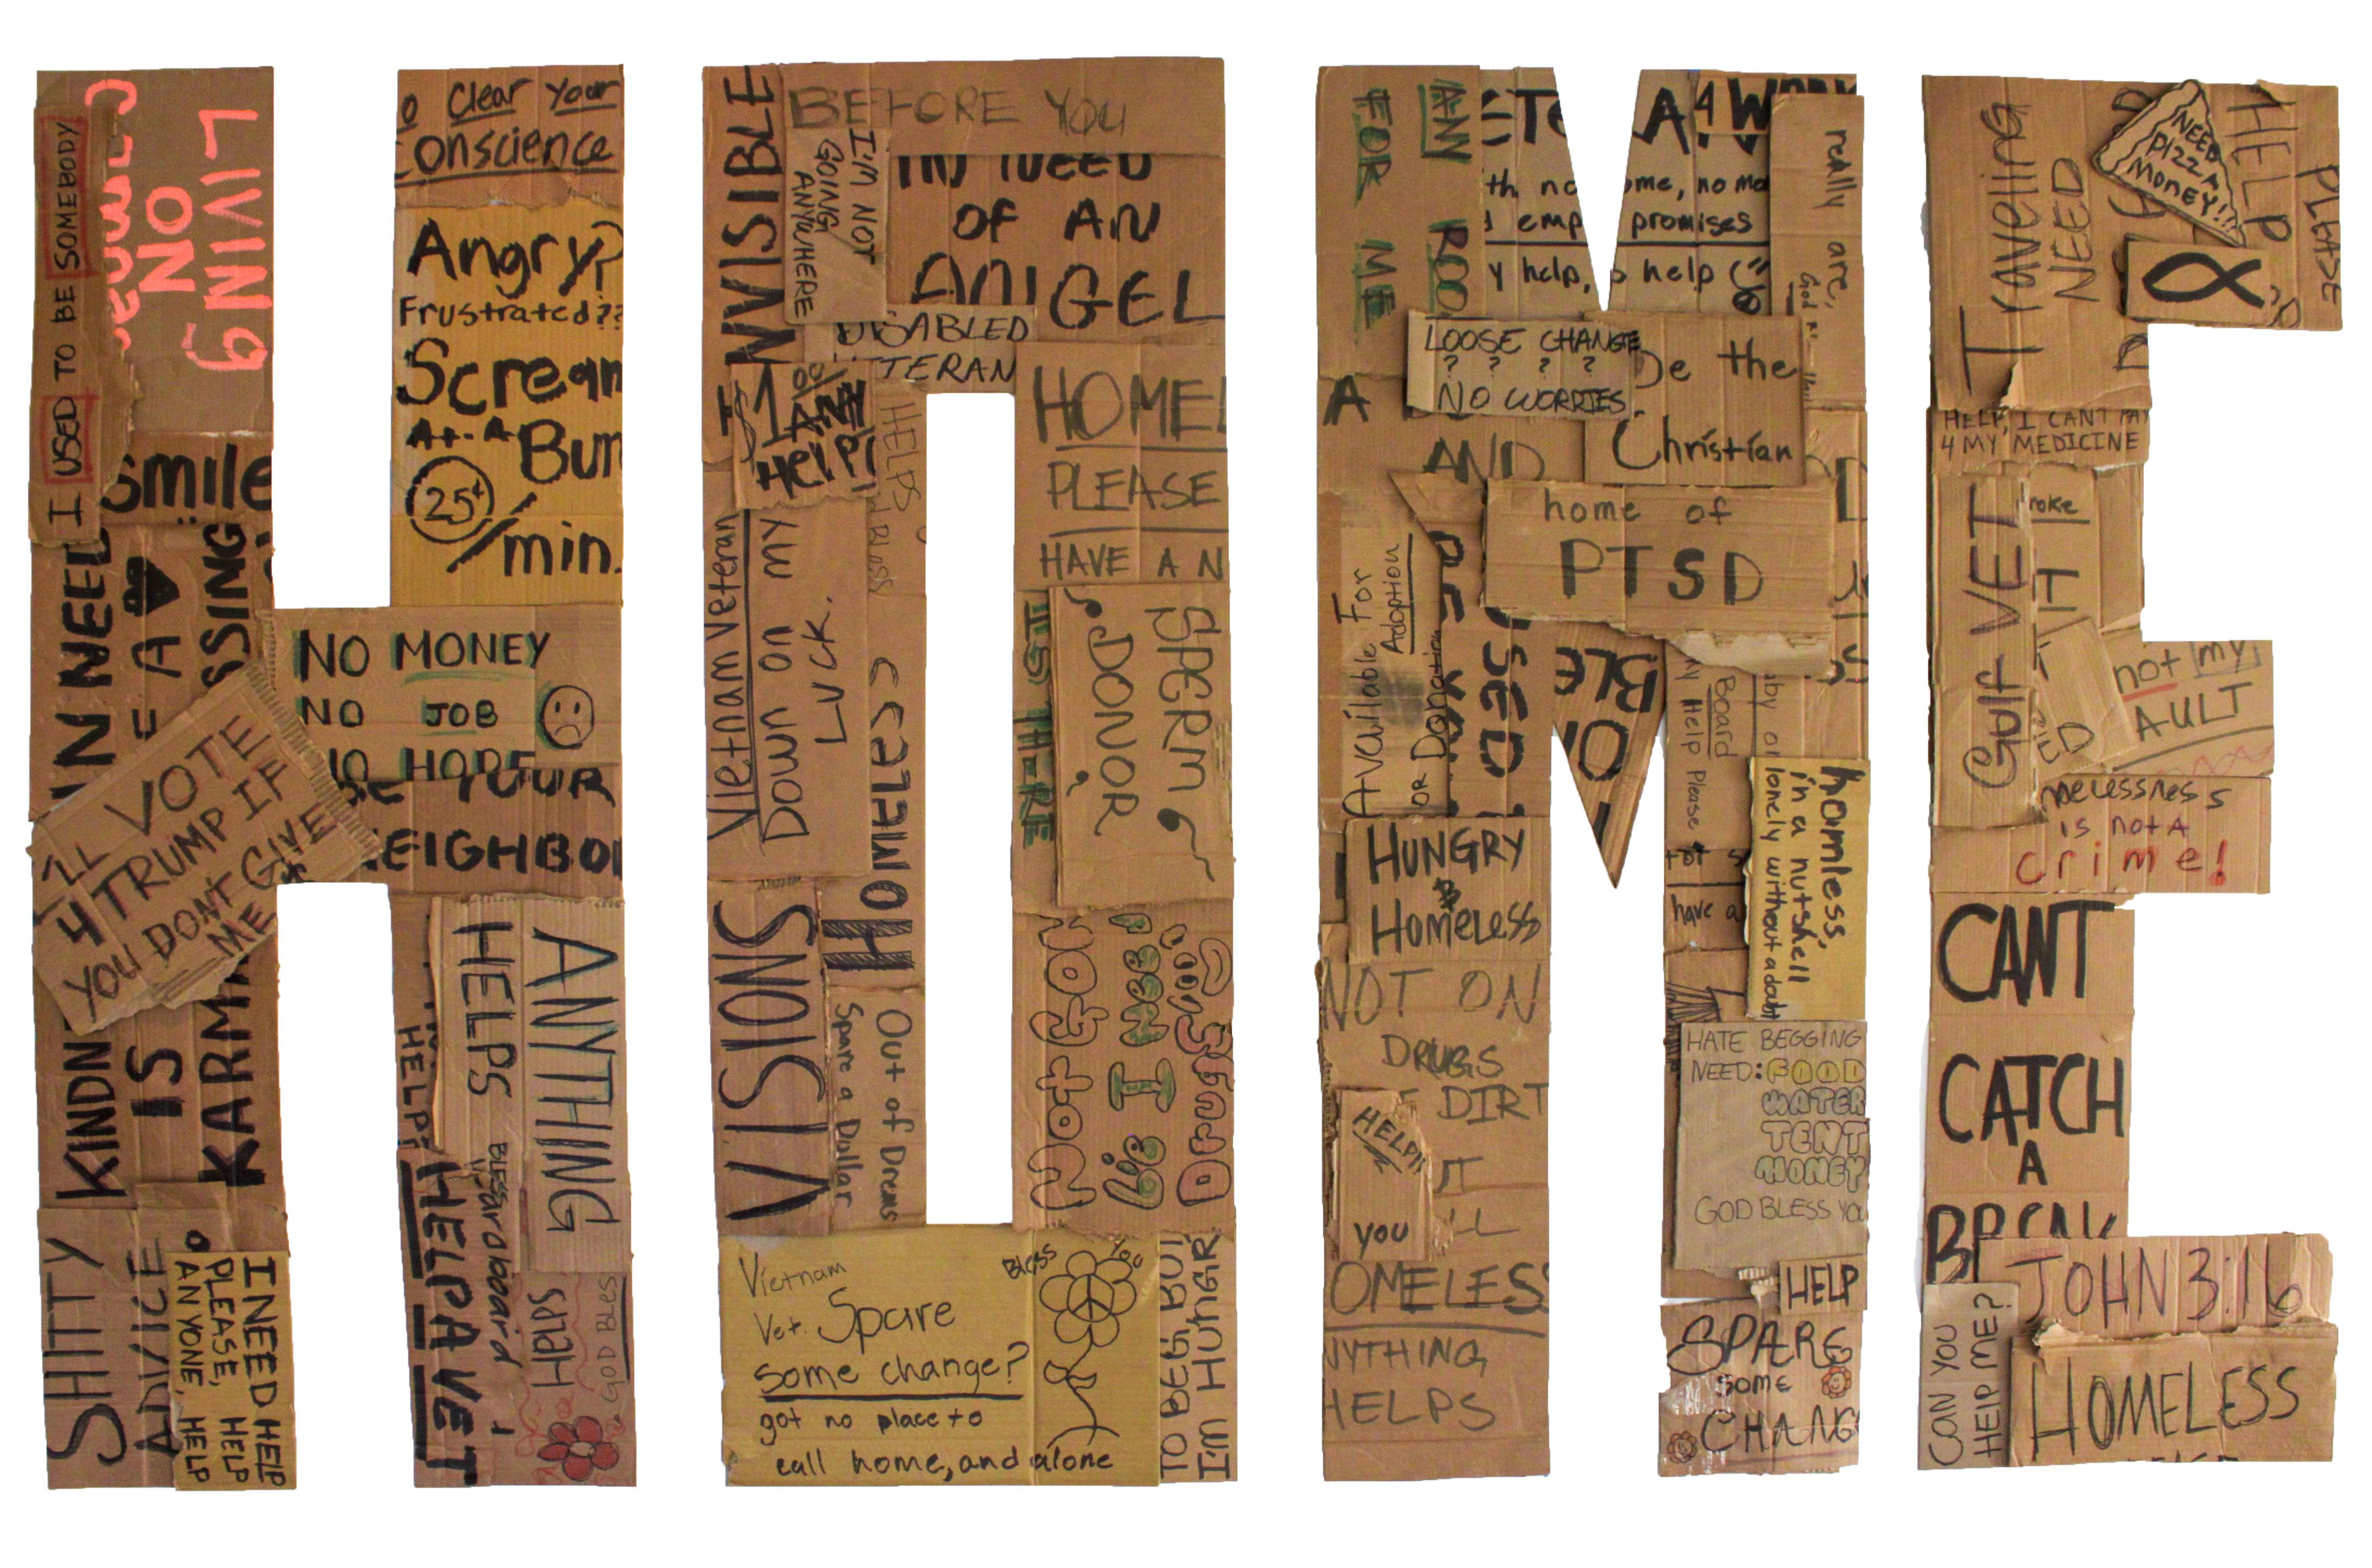 Several cardboard signs created by homeless people that spell out the word "Home"